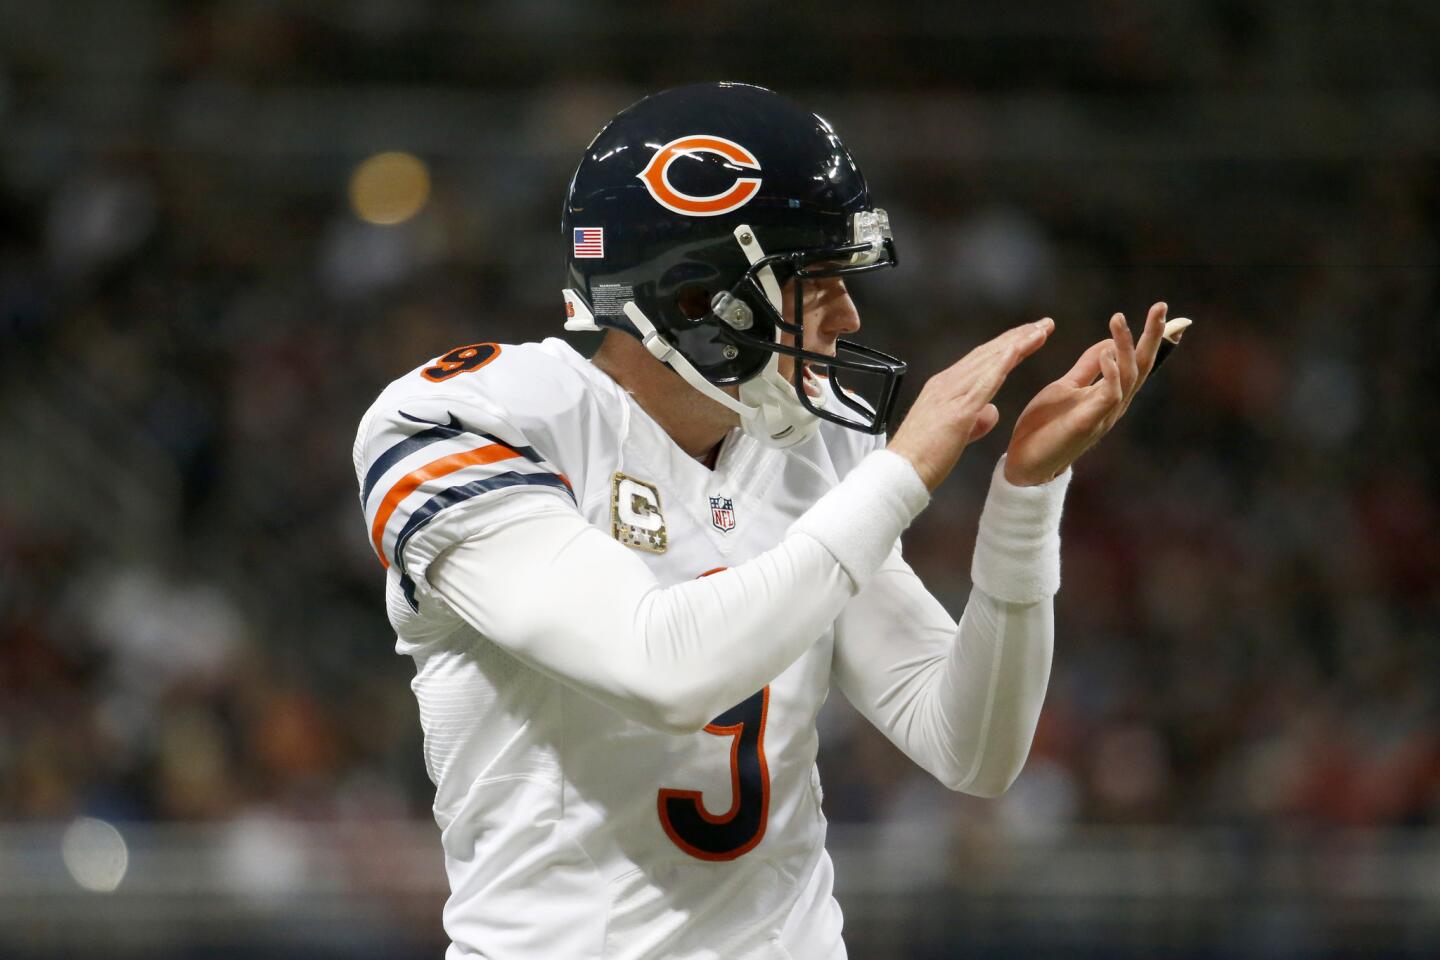 Robbie Gould applauds the kick-off team for good coverage in the fourth quarter against the Rams.